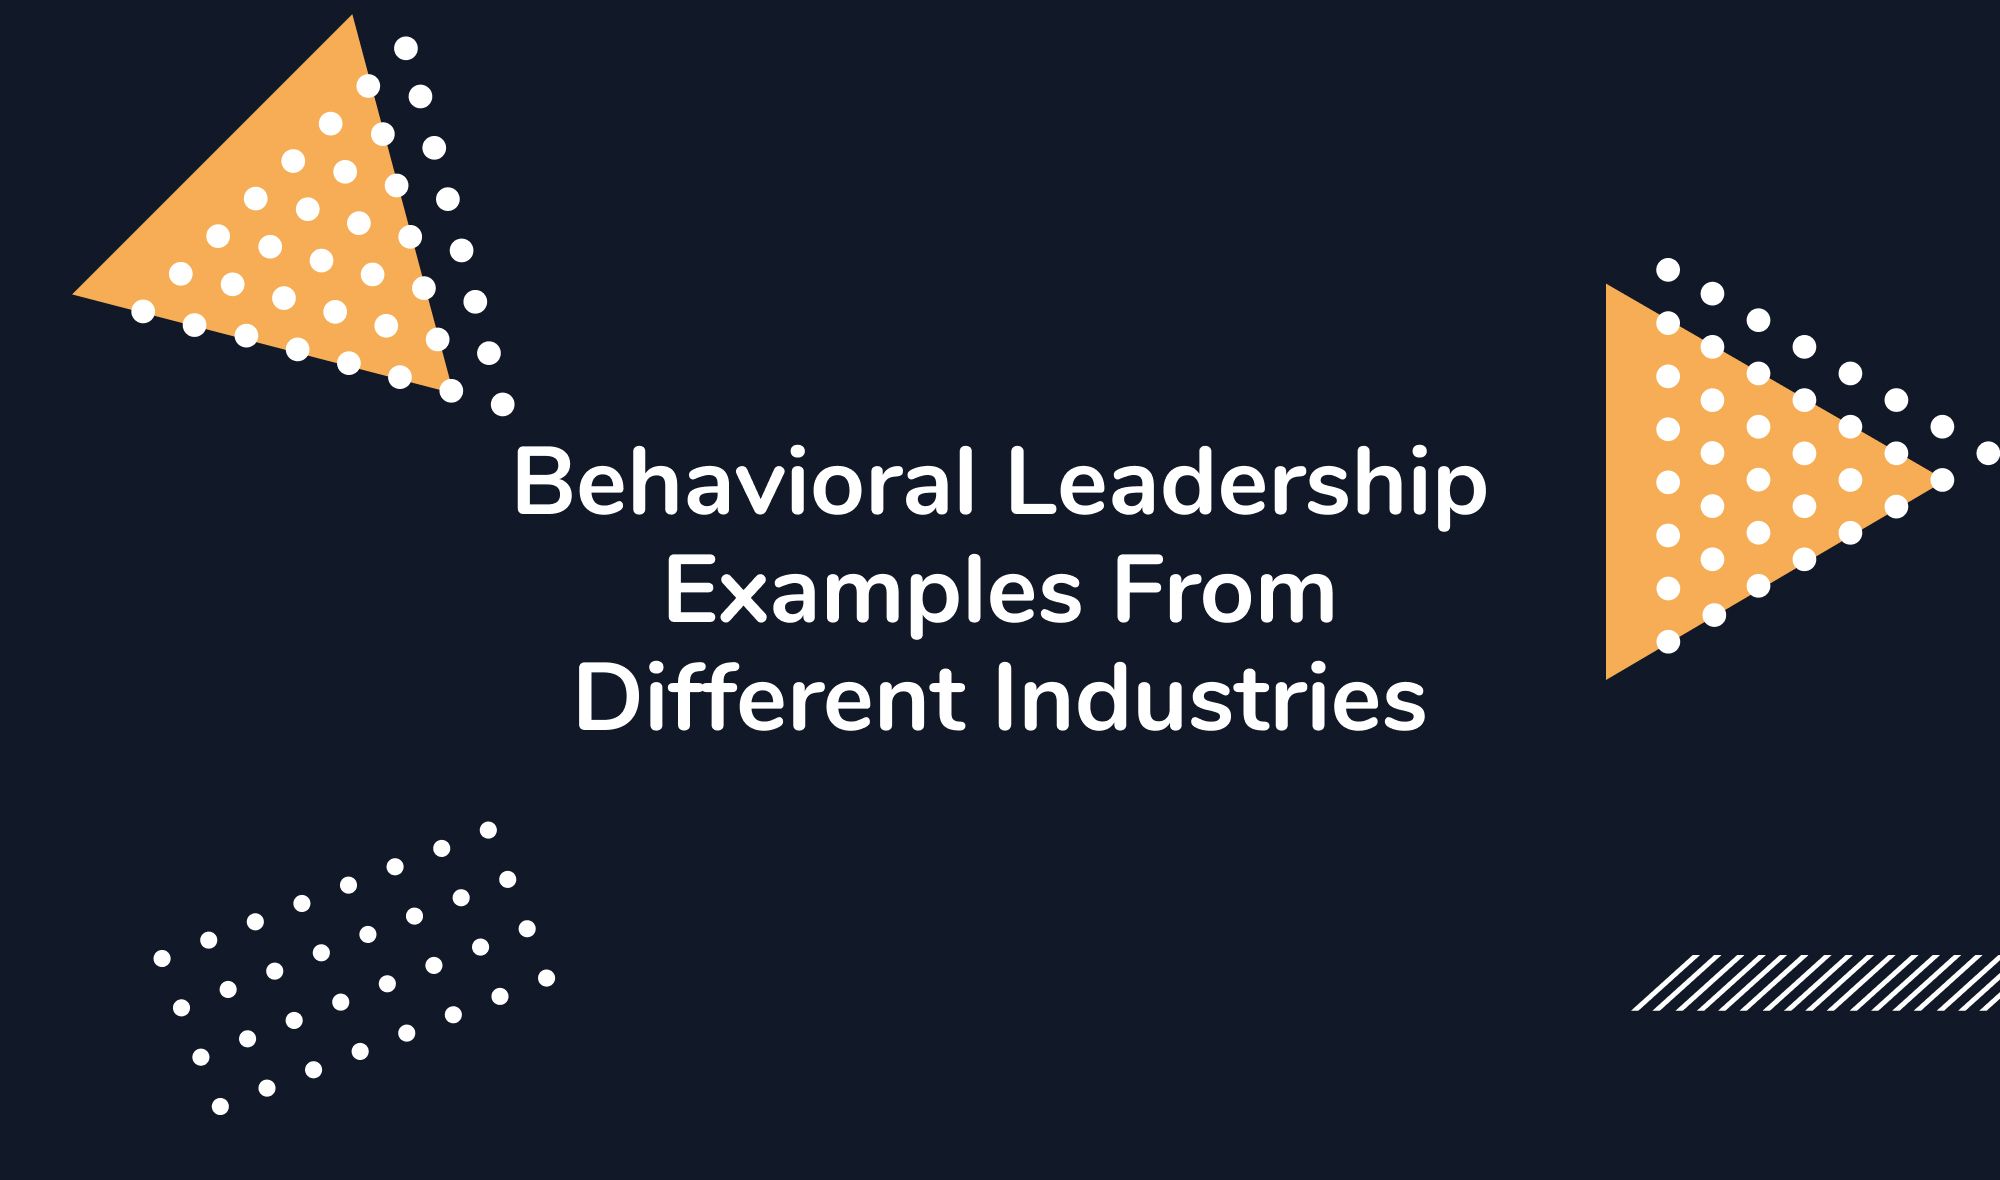 Behavioral Leadership Examples From Different Industries